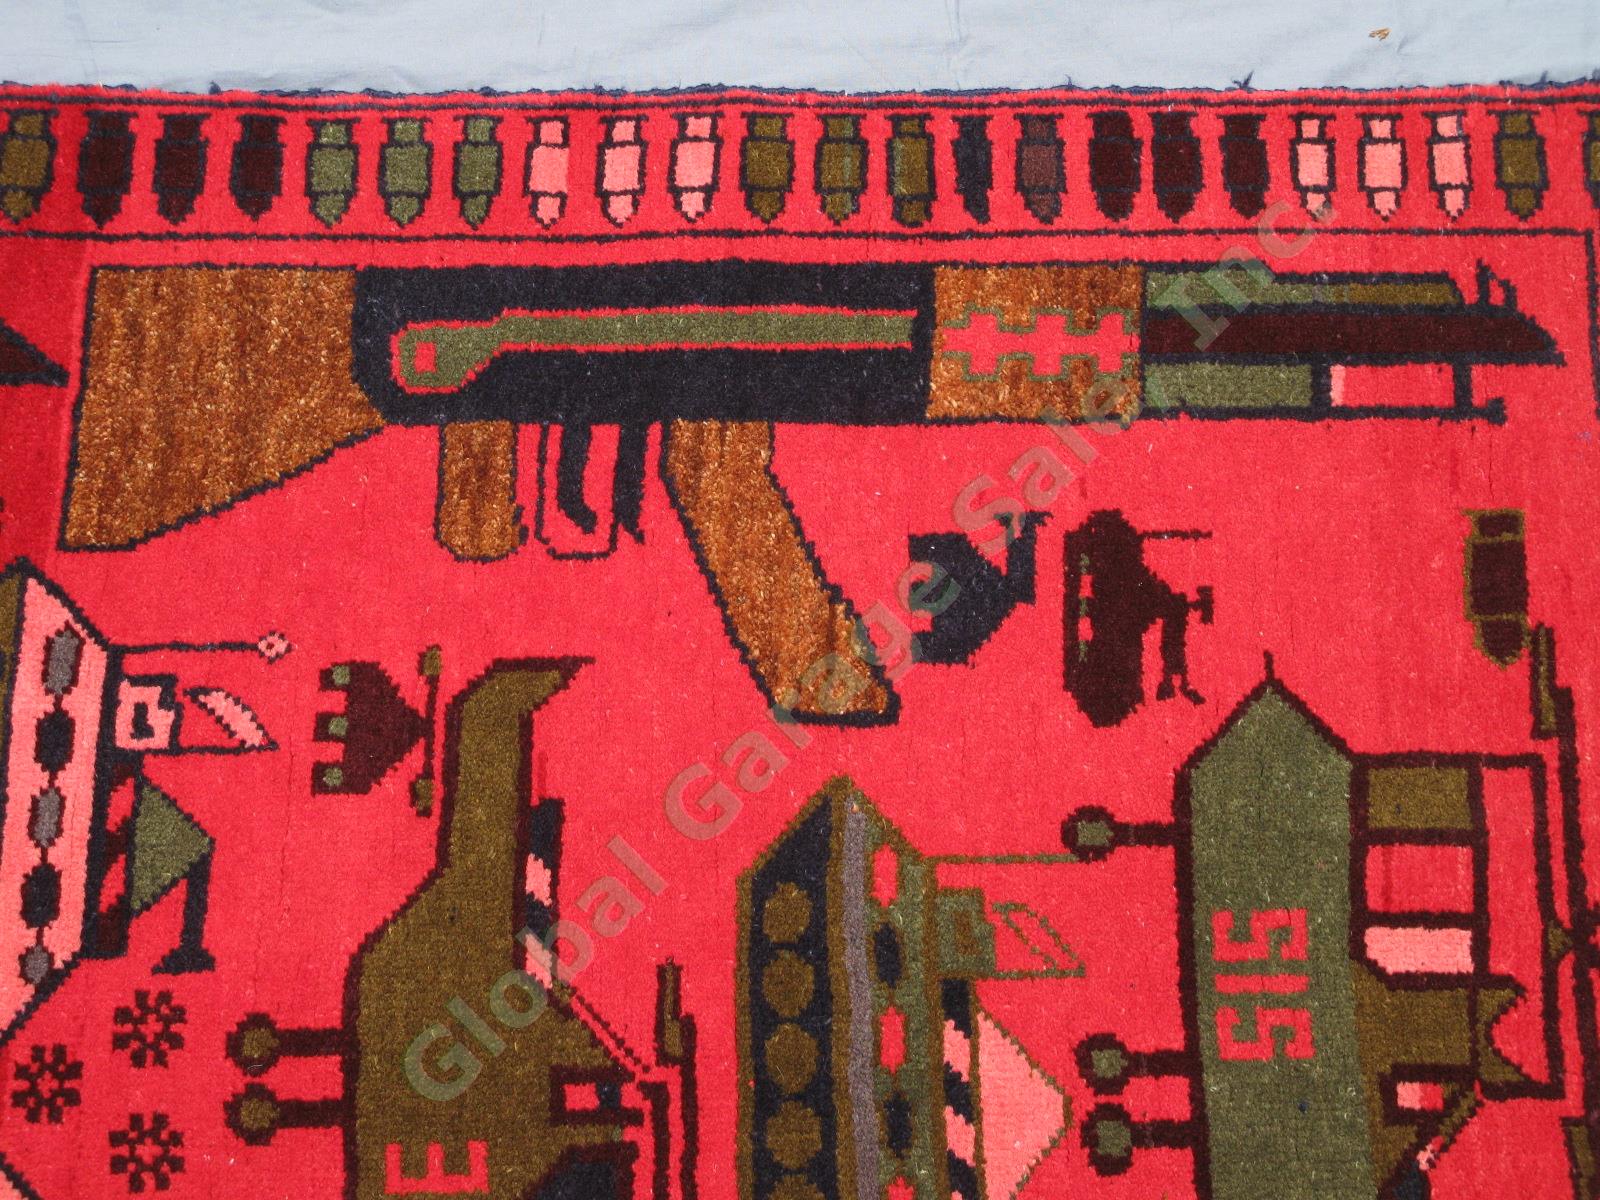 Authentic Afghan Tribal War Rug Circa 2007 Tanks Helicopters AK-47 38.5"x60" NR 3